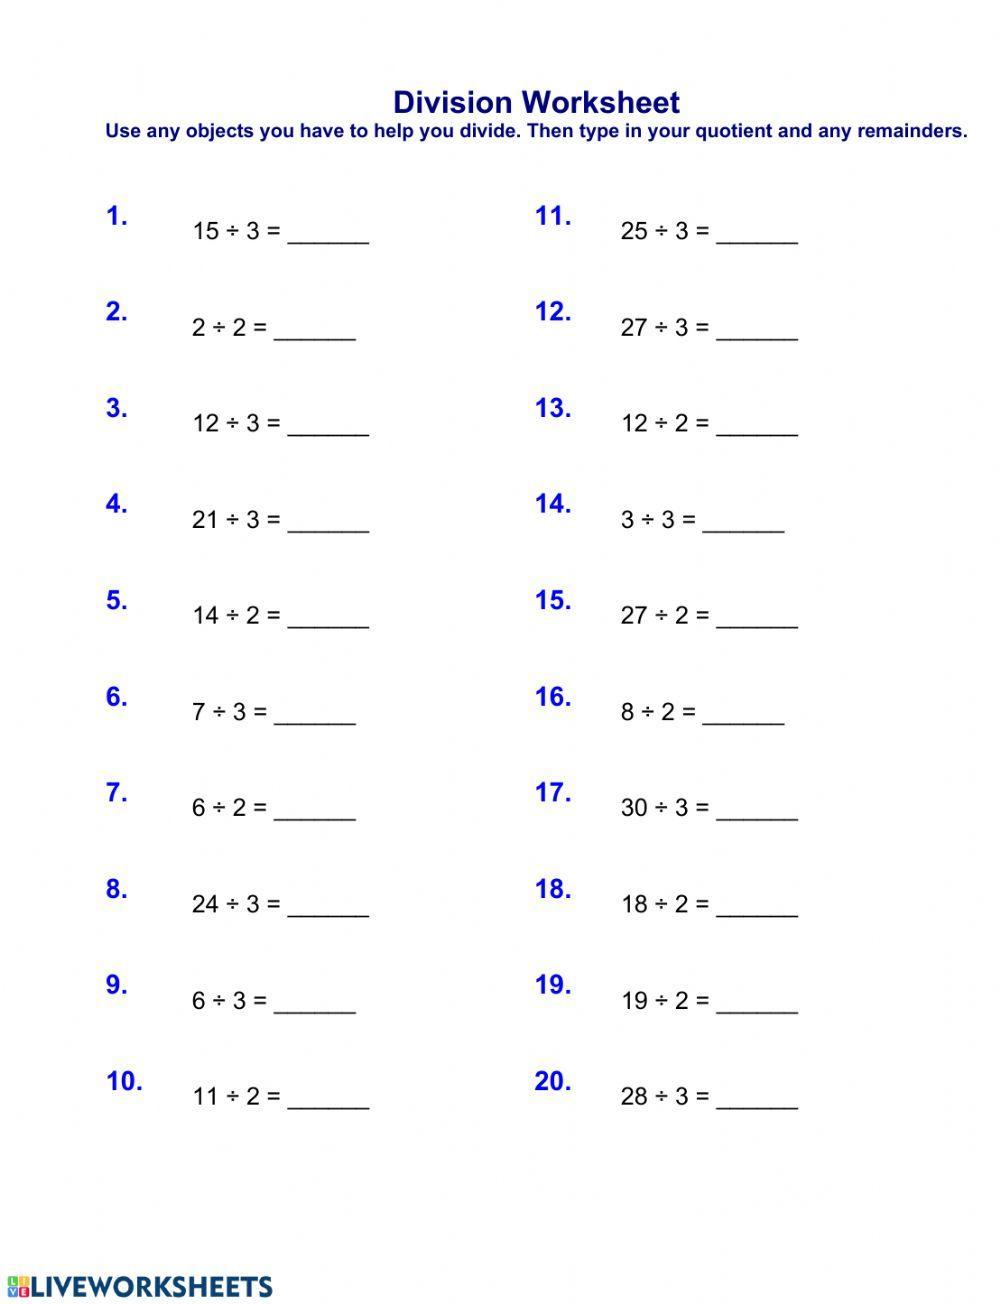 Division by 2 and 3 with and without remainders